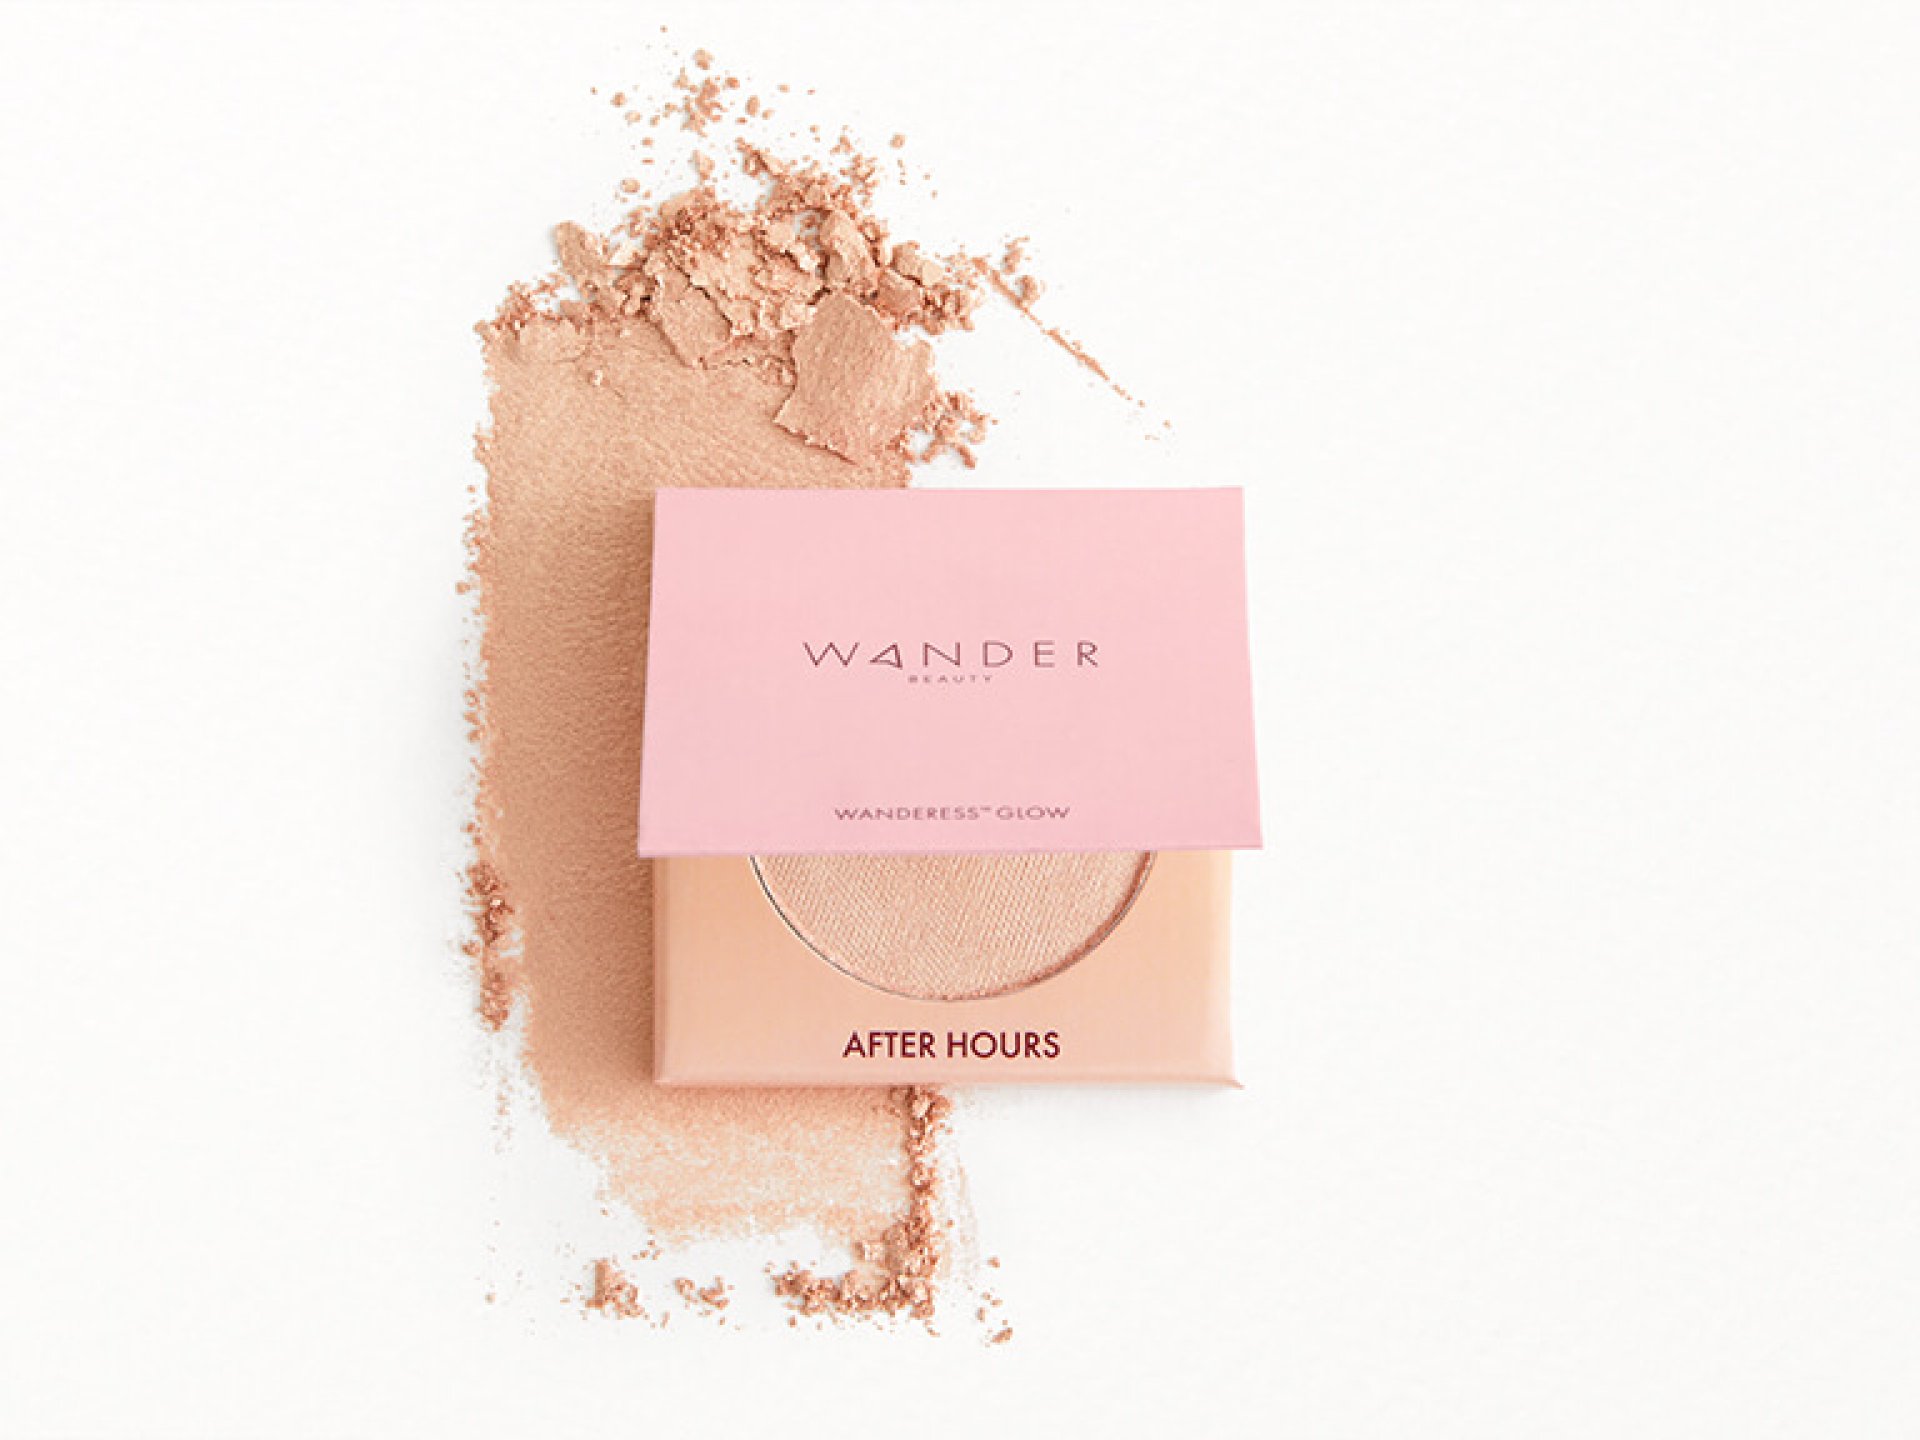 WANDER BEAUTY Wanderess Glow Highlighter in After Hours